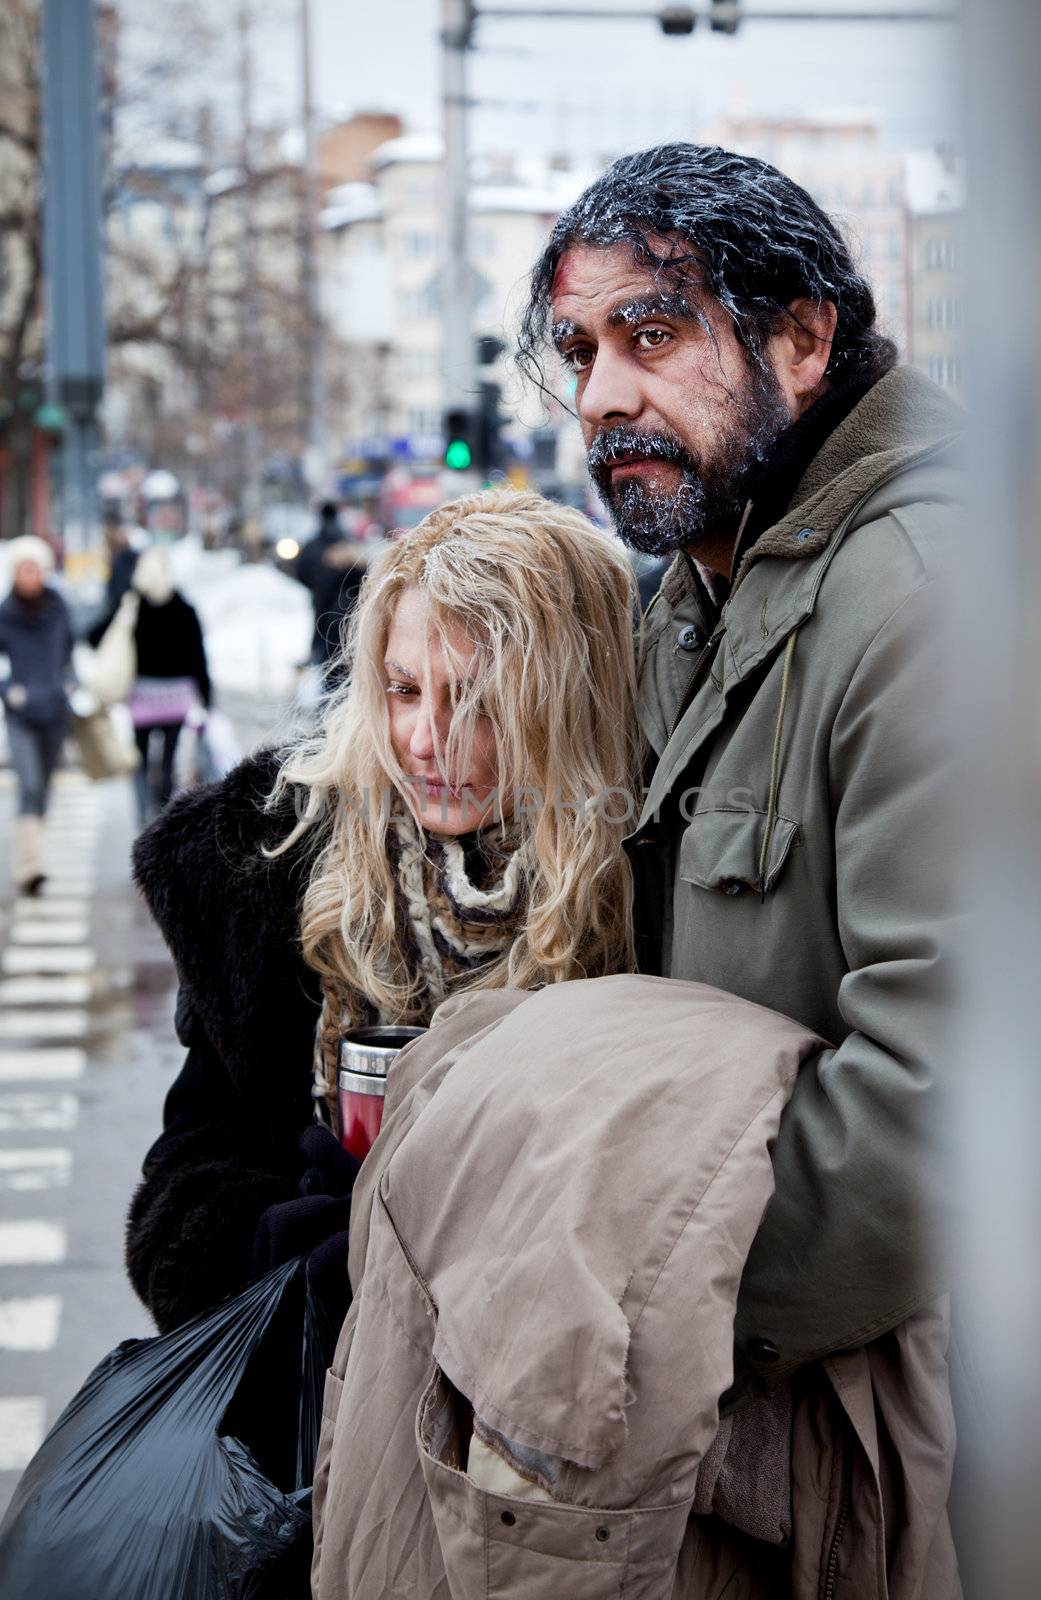 Homeless struggling couple embracing in city centre, freezing